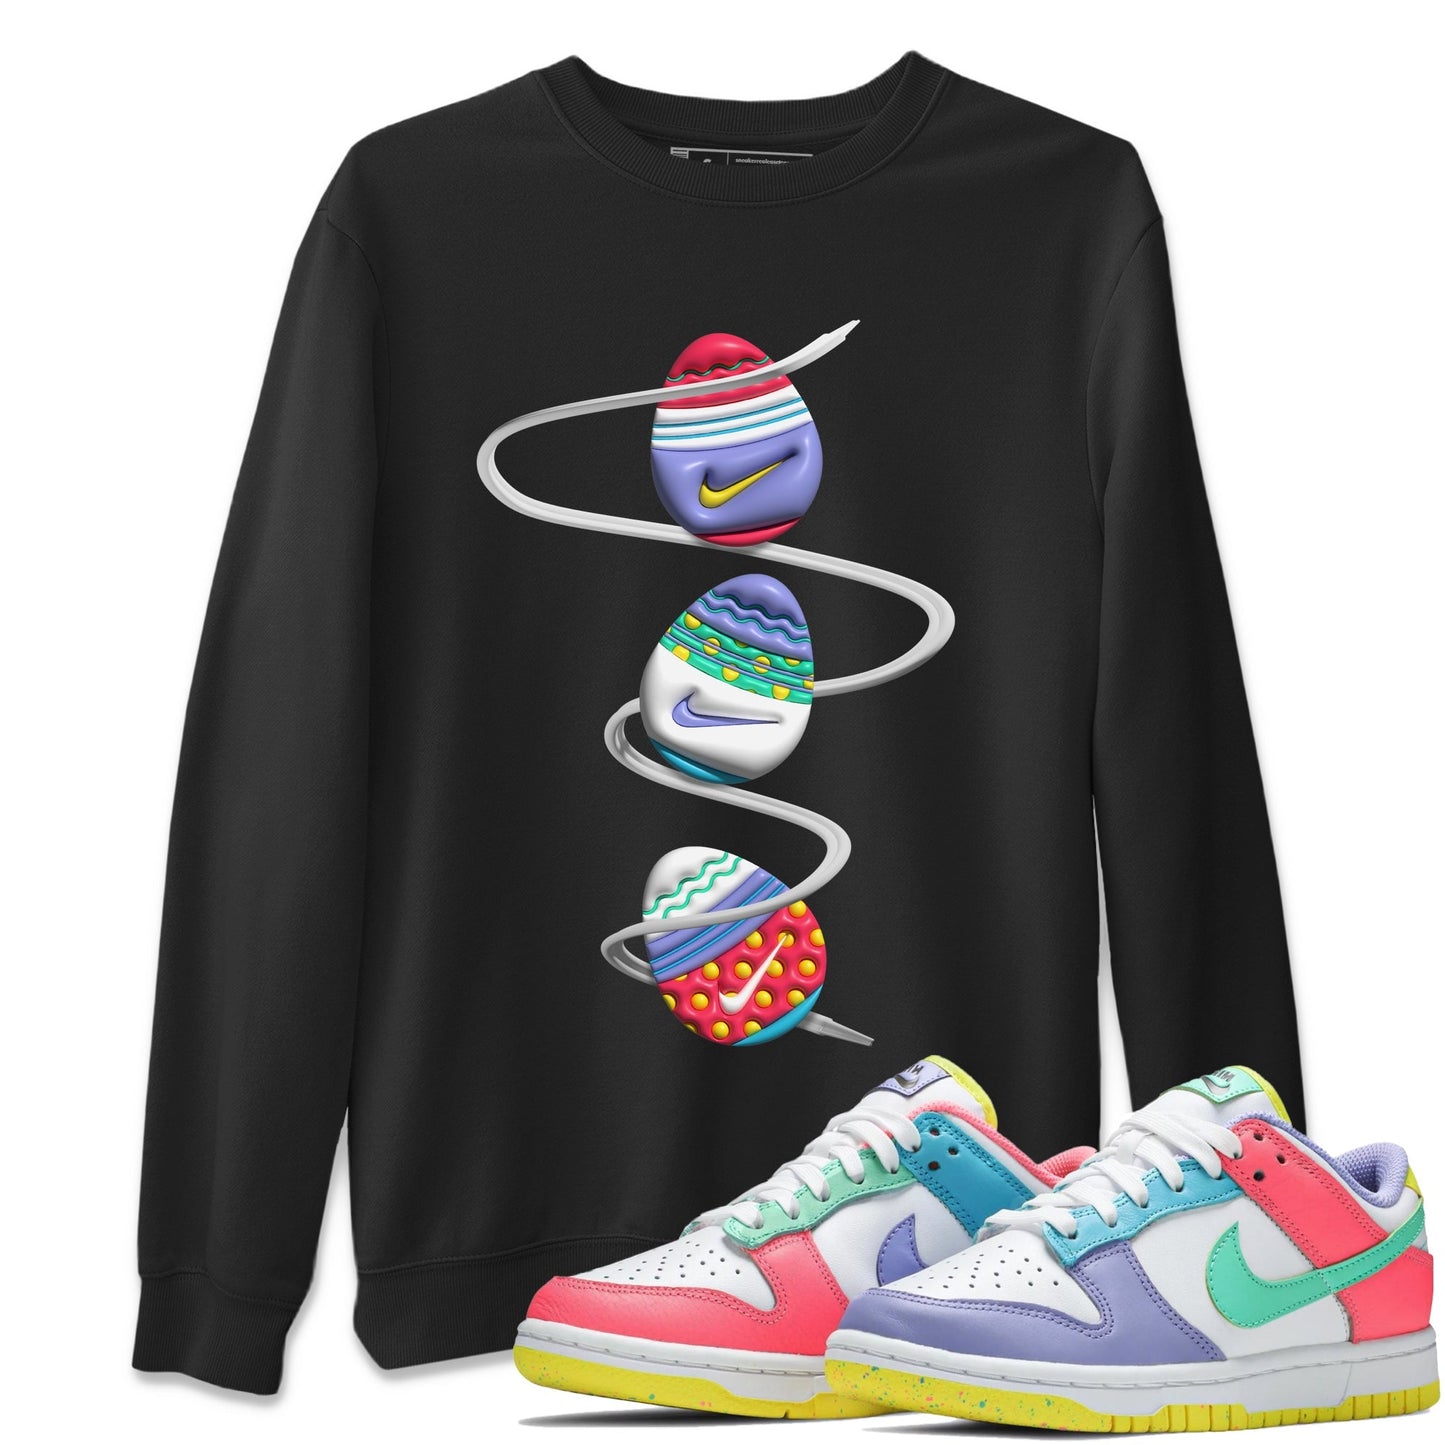 Dunk Easter Candy Sneaker Tees Drip Gear Zone 3D Easter Eggs Sneaker Tees Nike Easter Shirt Unisex Shirts Black 1